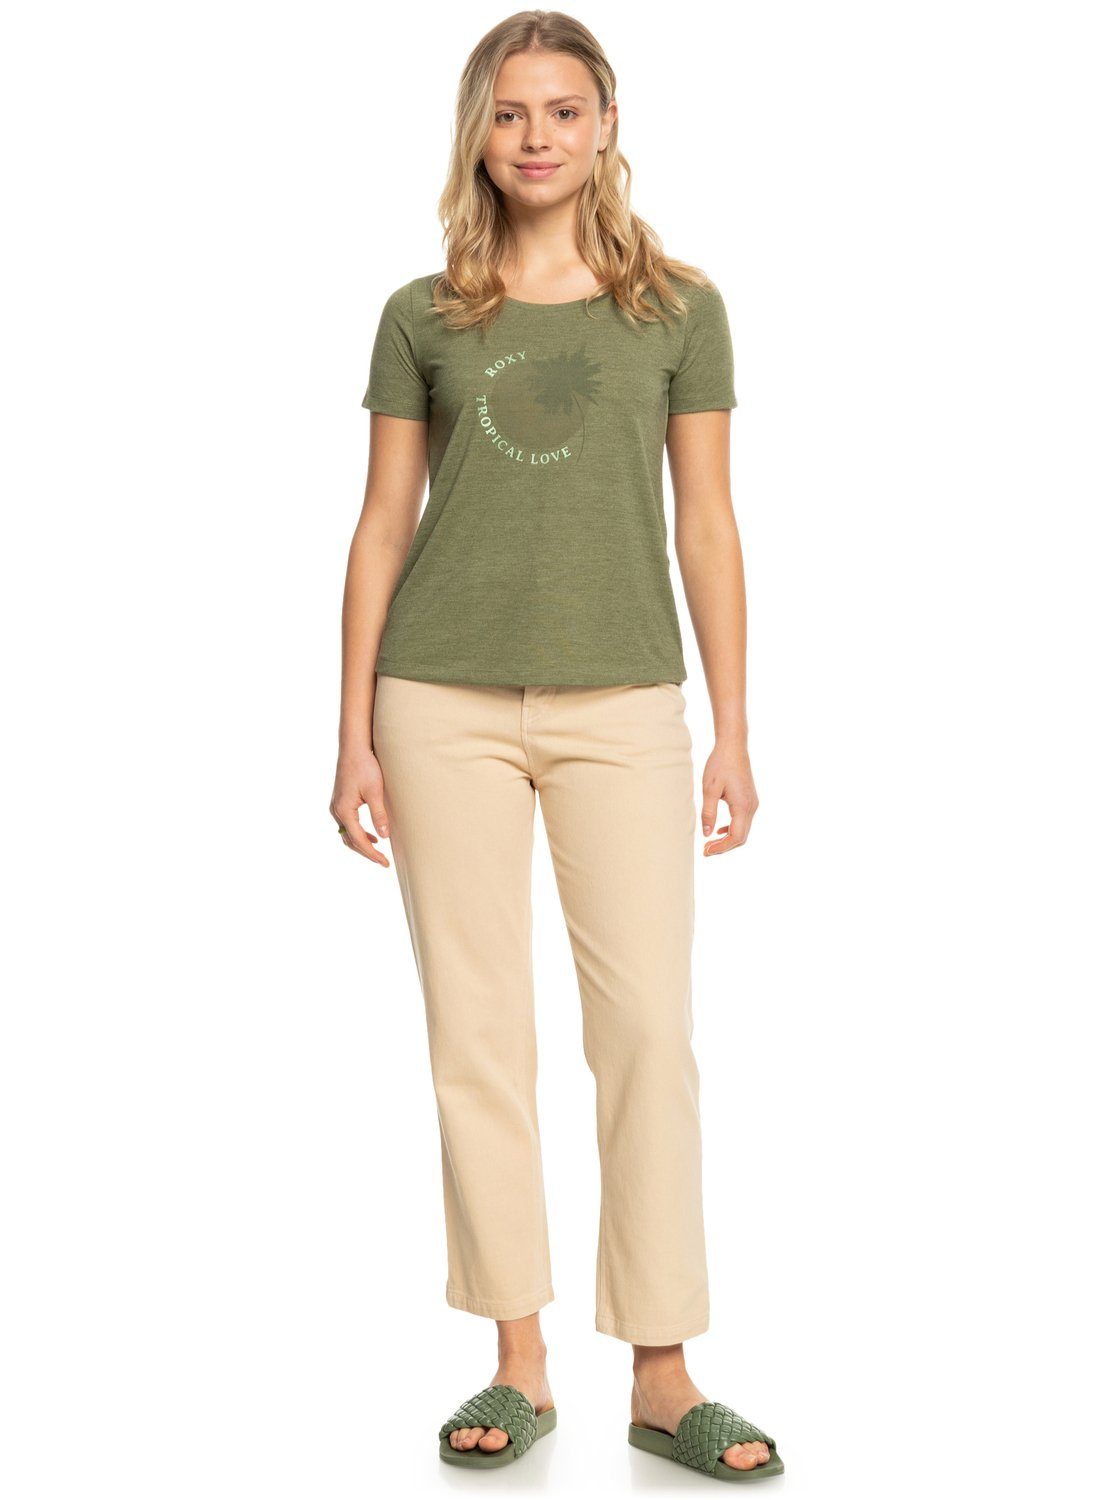 Loden Green Chasing T-Shirt Roxy The Wave